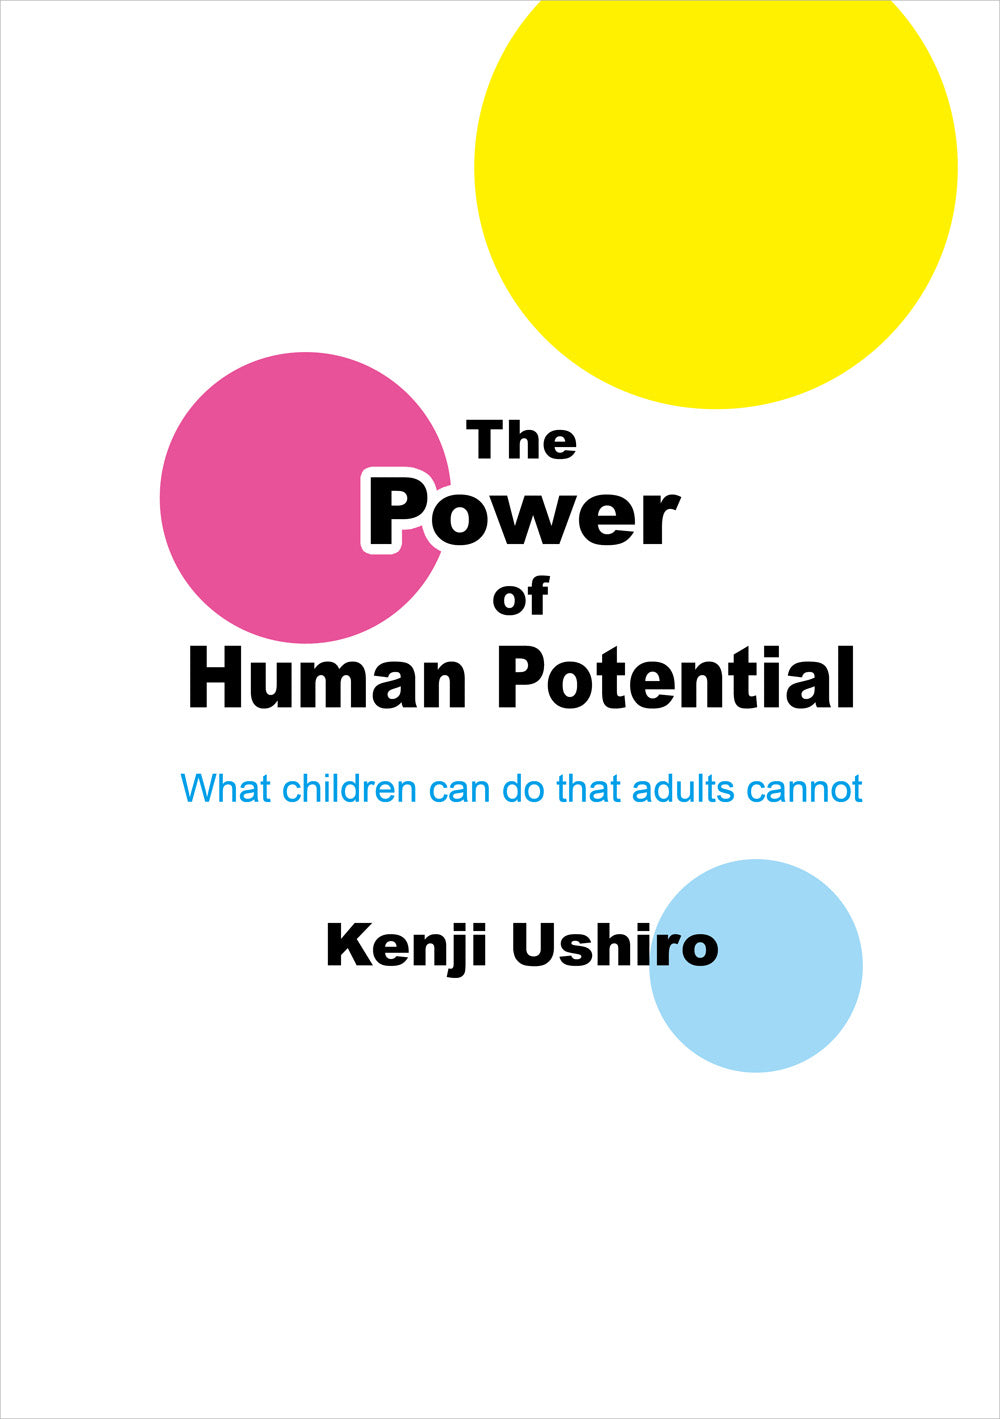 The Power of Human Potential Book by Kenji Ushiro - Budovideos Inc